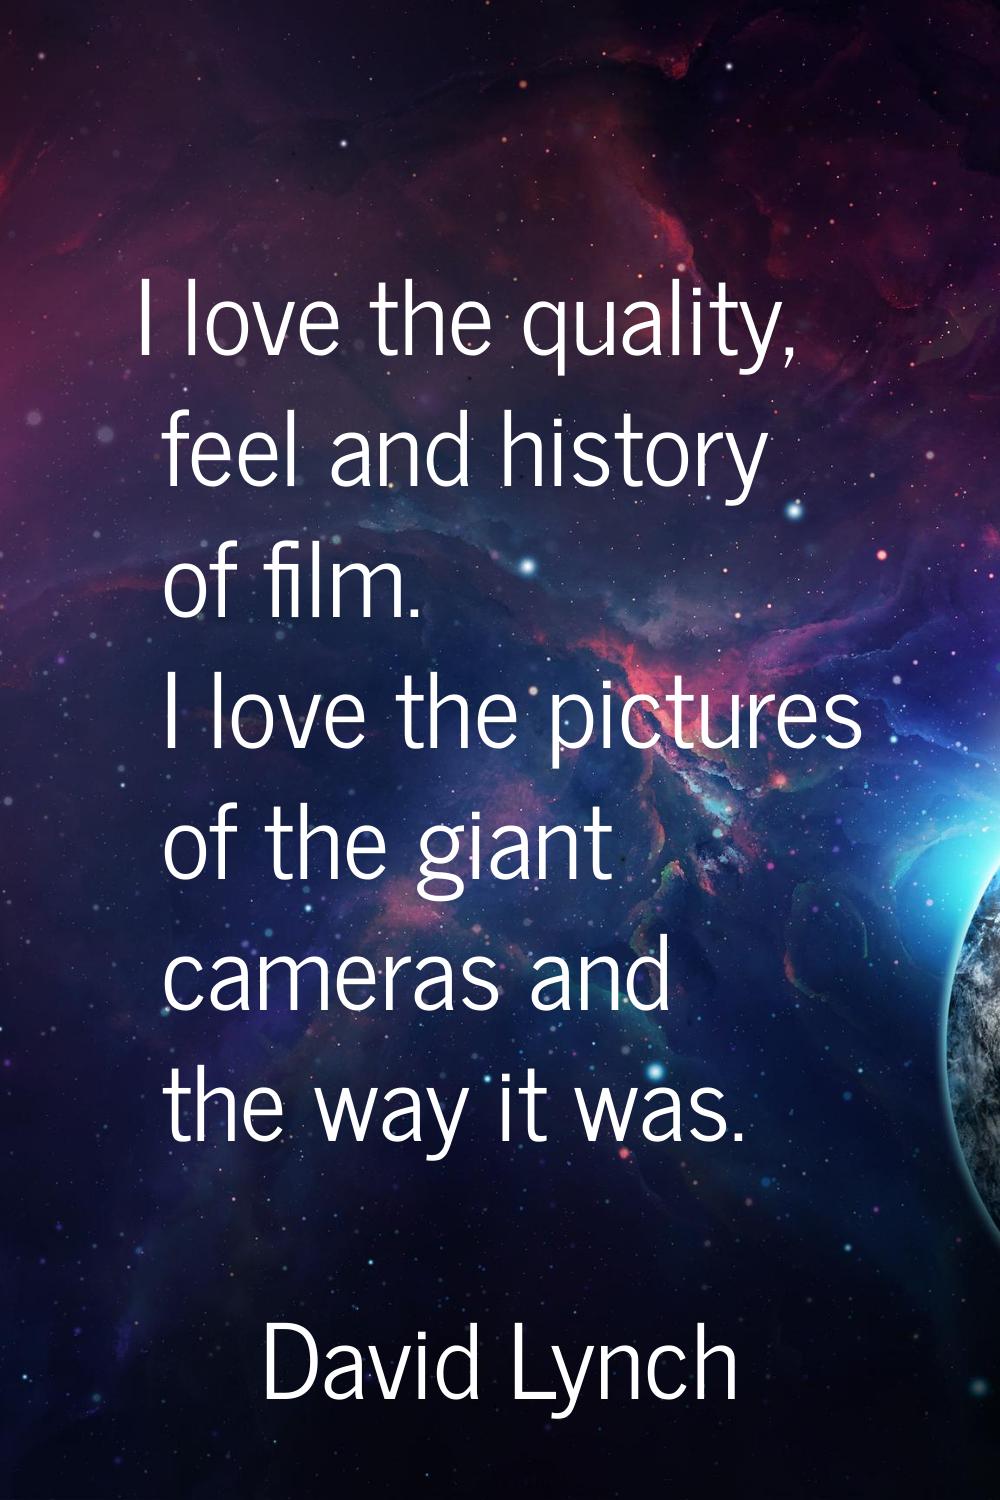 I love the quality, feel and history of film. I love the pictures of the giant cameras and the way 